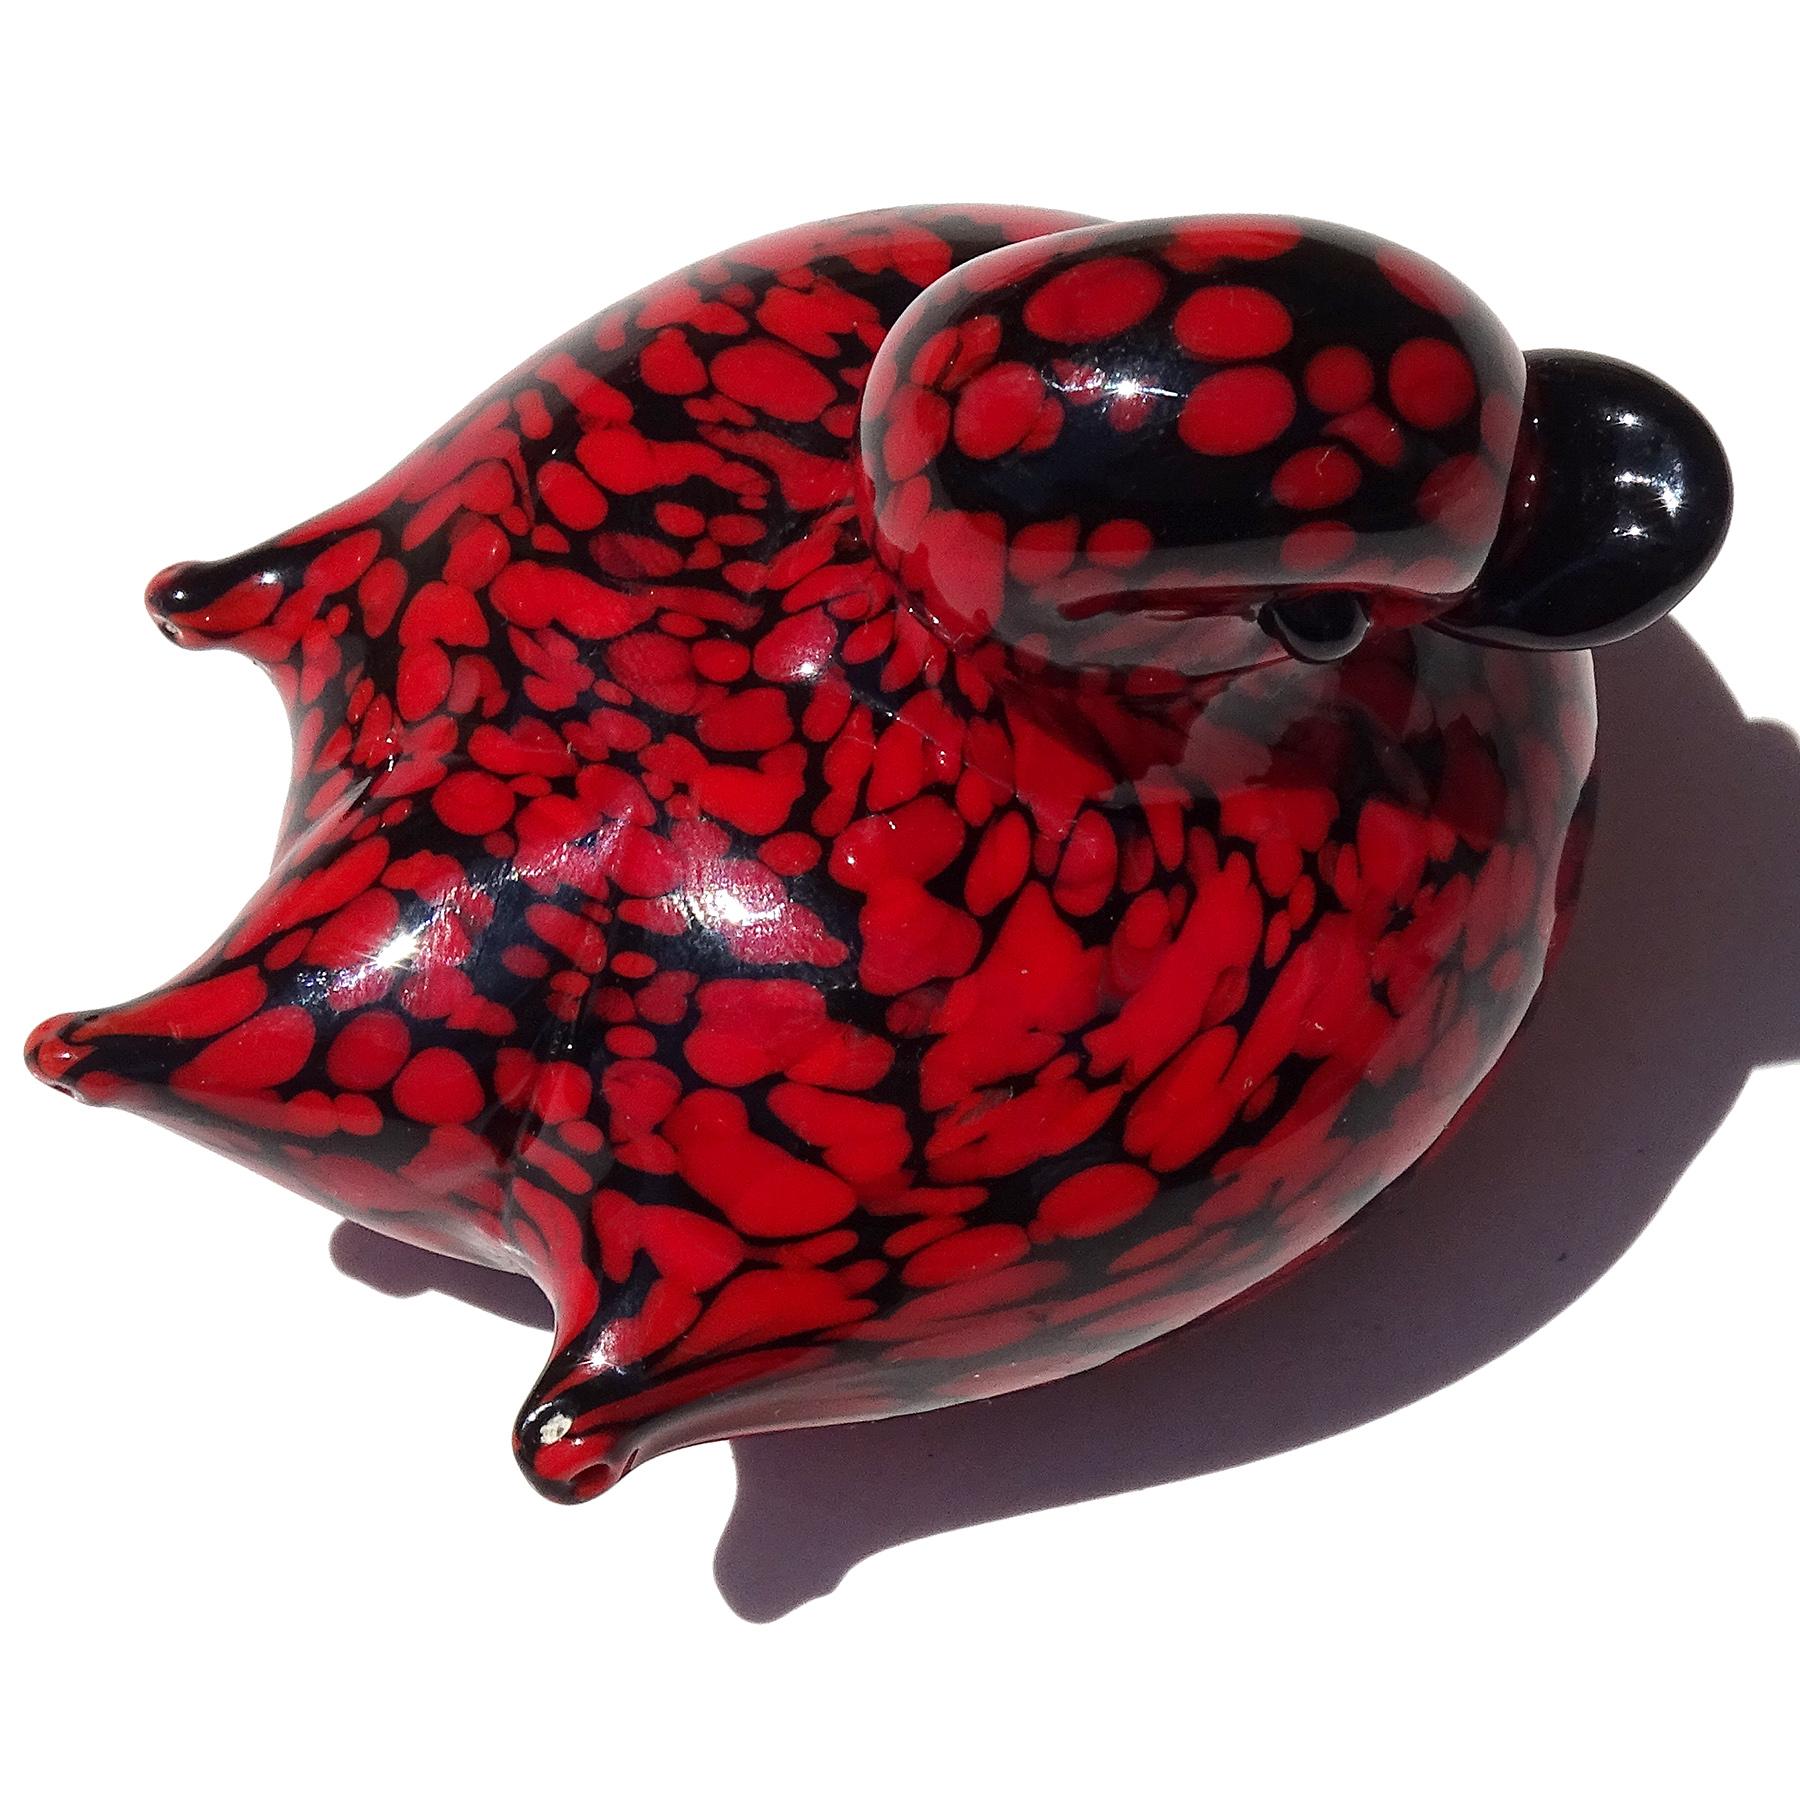 Hand-Crafted Archimede Seguso Murano Red Black Italian Art Glass Baby Bird Figurine Sculpture For Sale